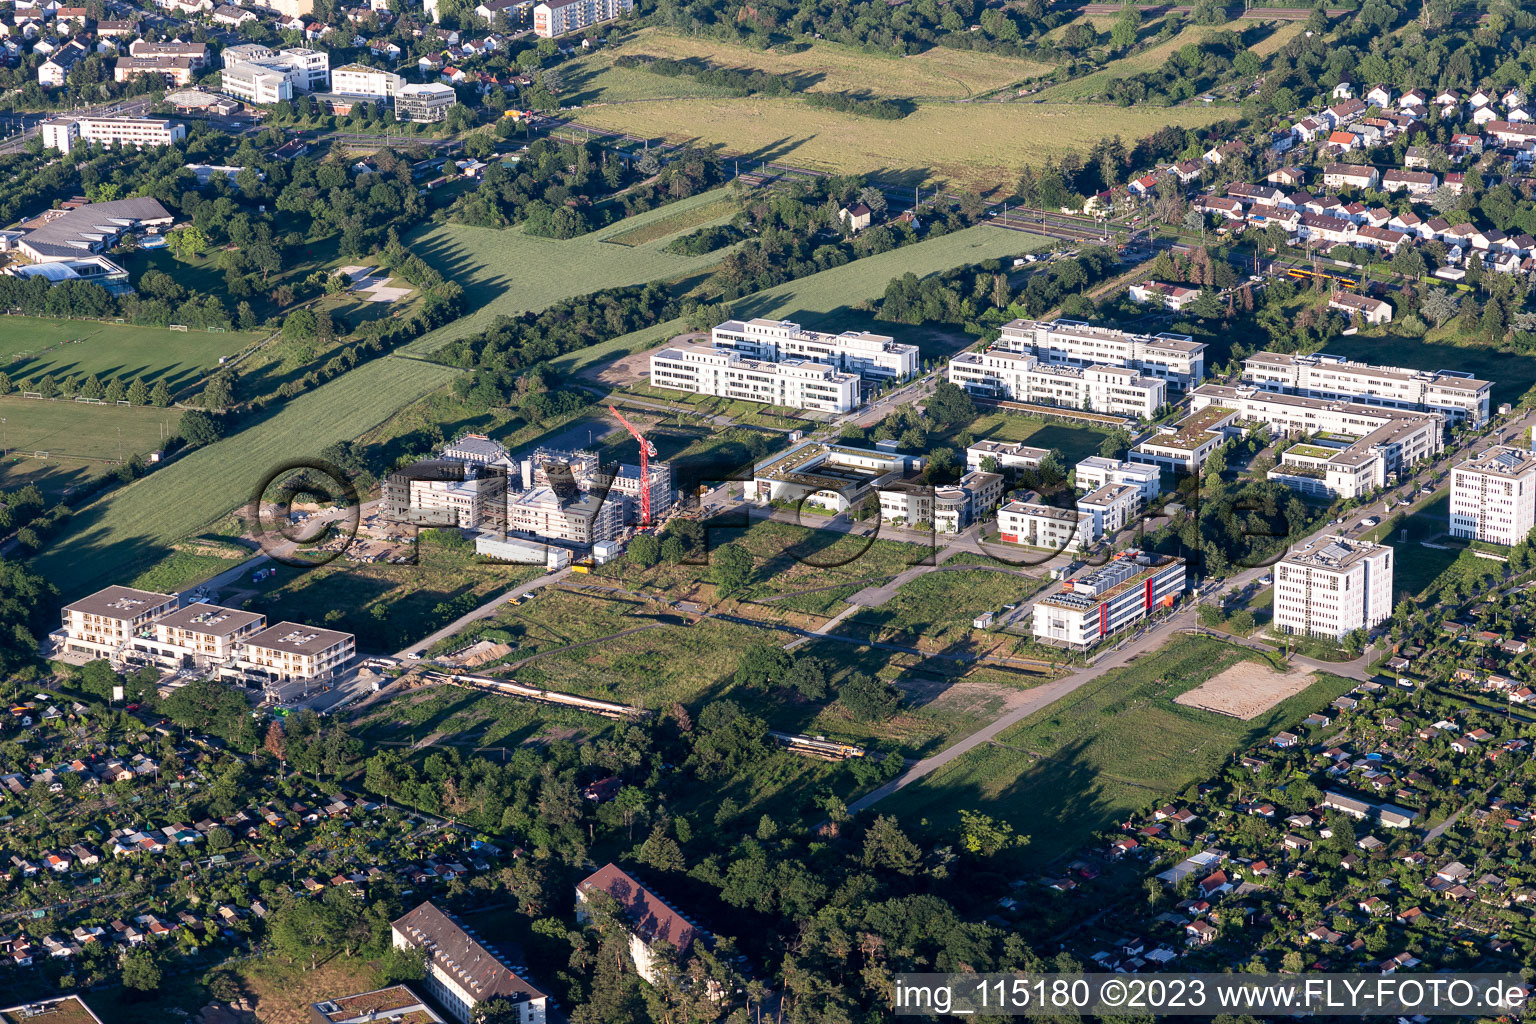 Aerial view of Technology Park in the district Rintheim in Karlsruhe in the state Baden-Wuerttemberg, Germany